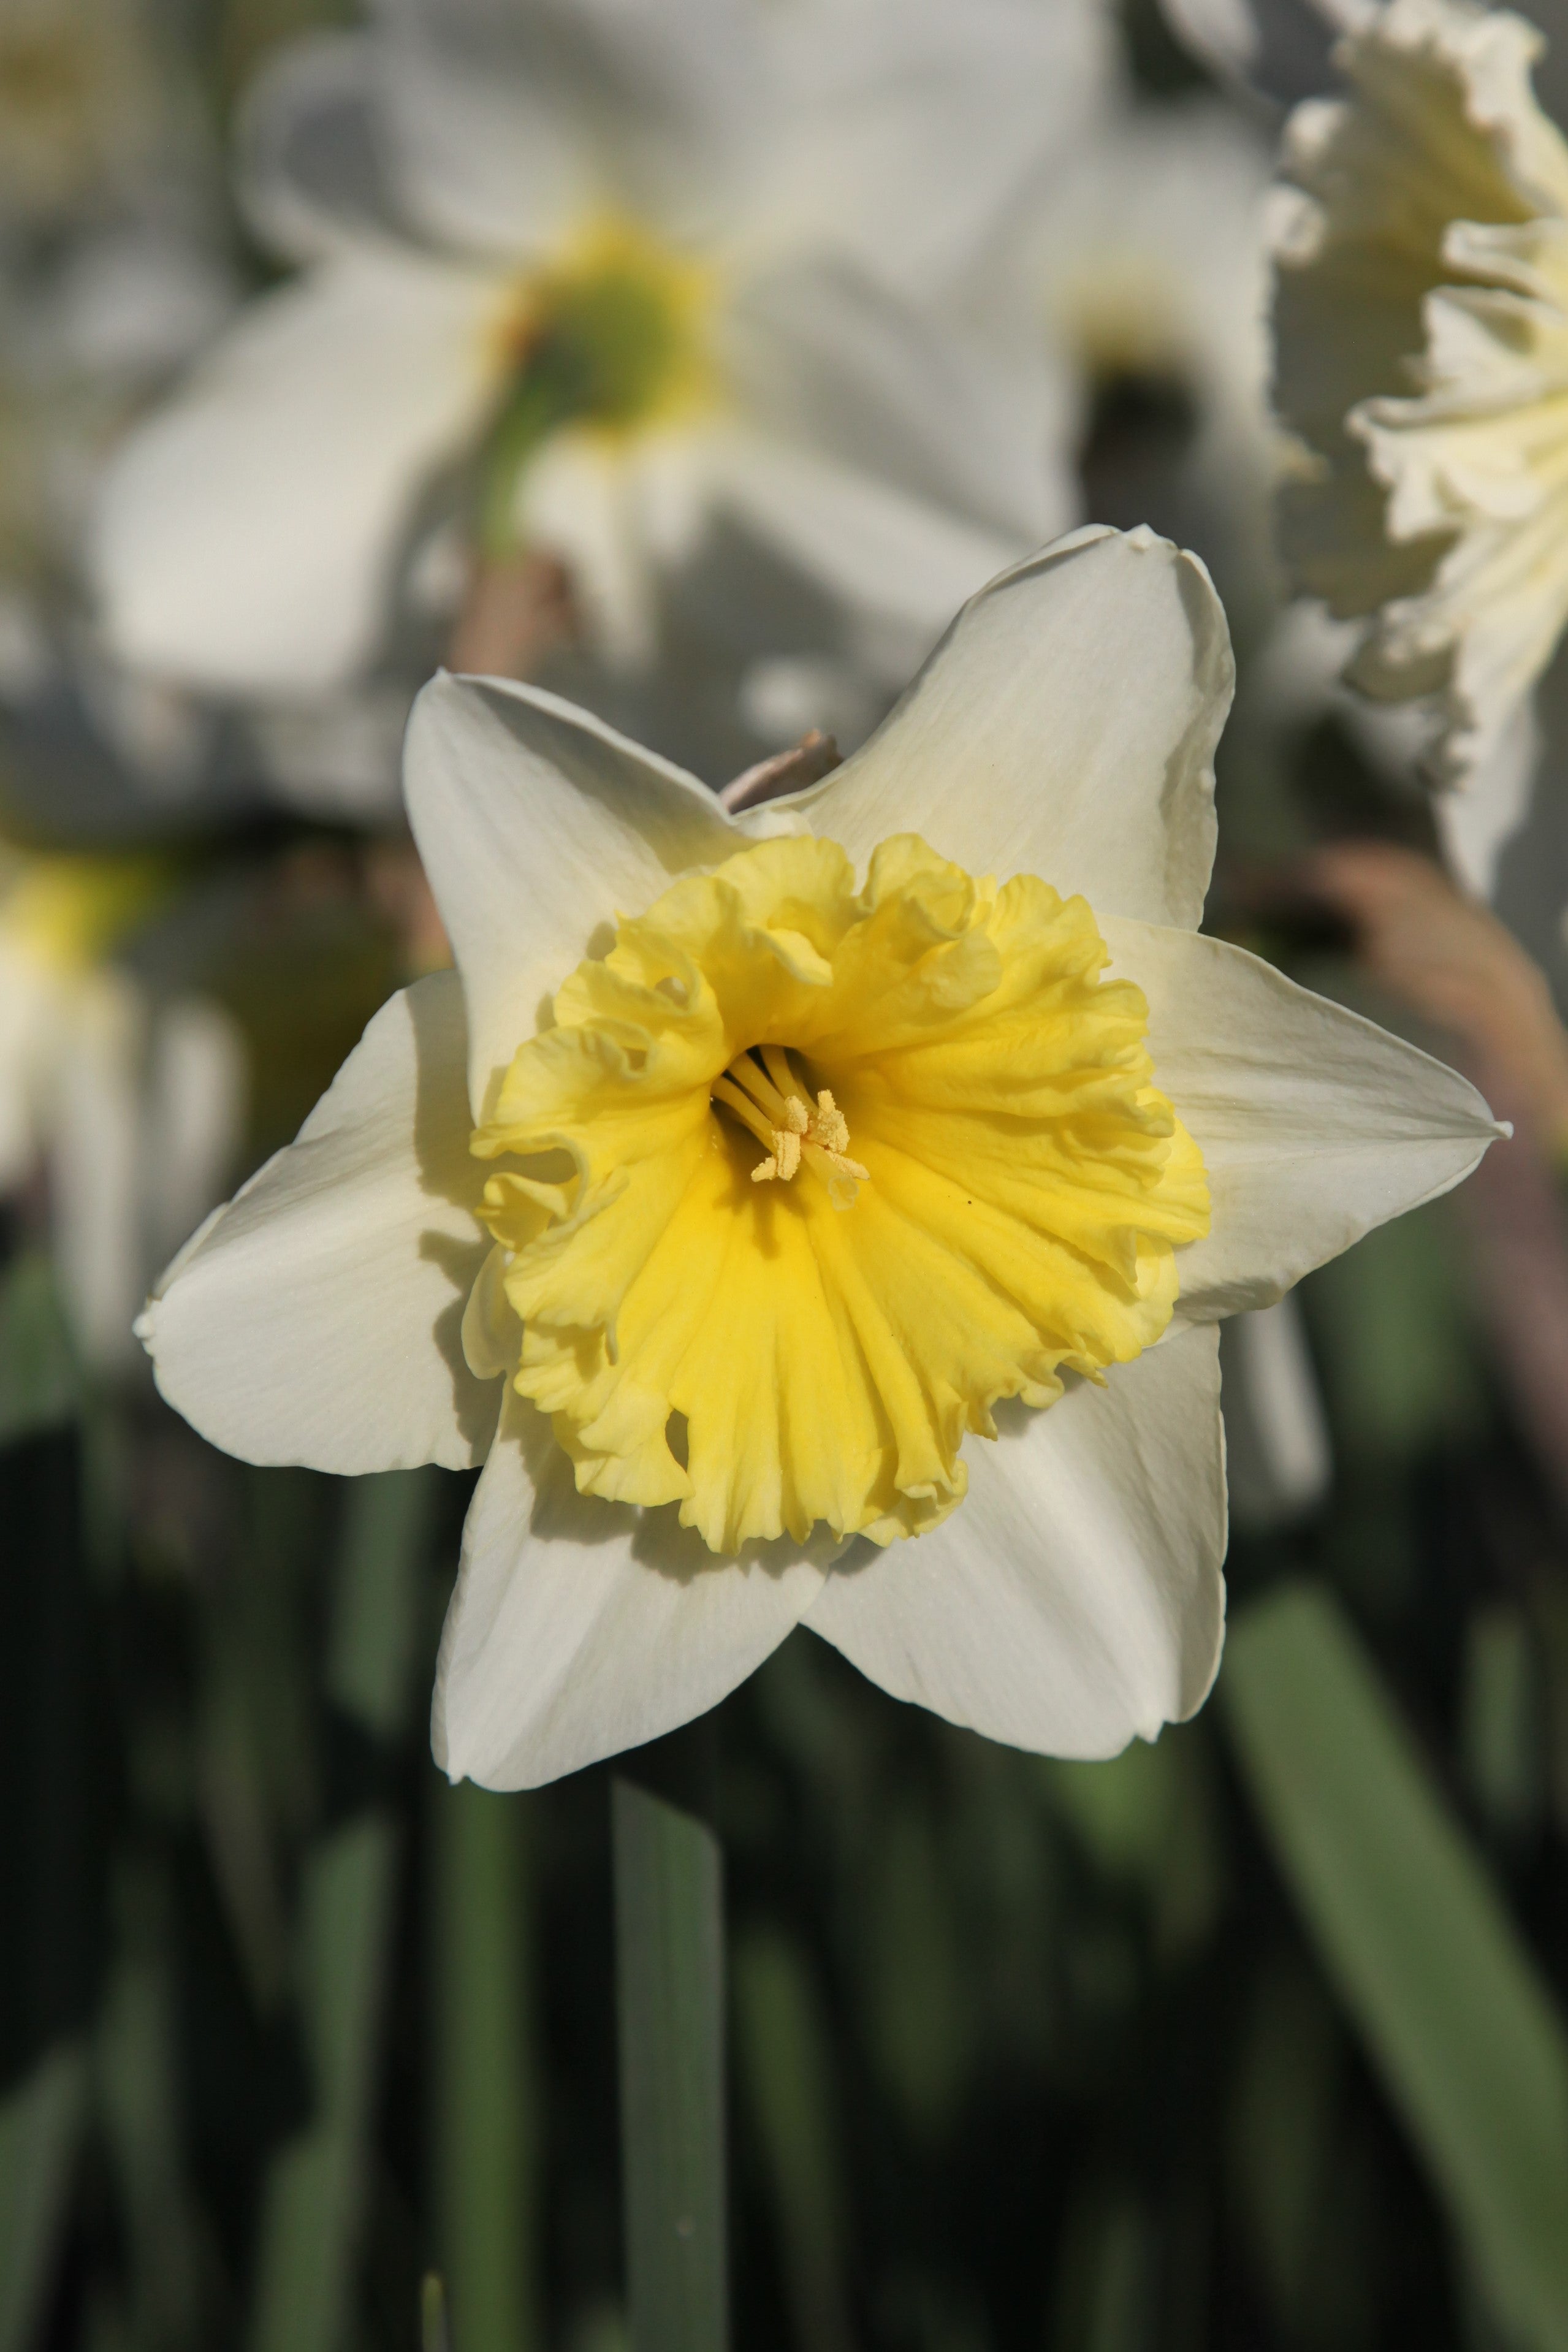 Close-up of daffodil ice follies with white petals and yellow cup